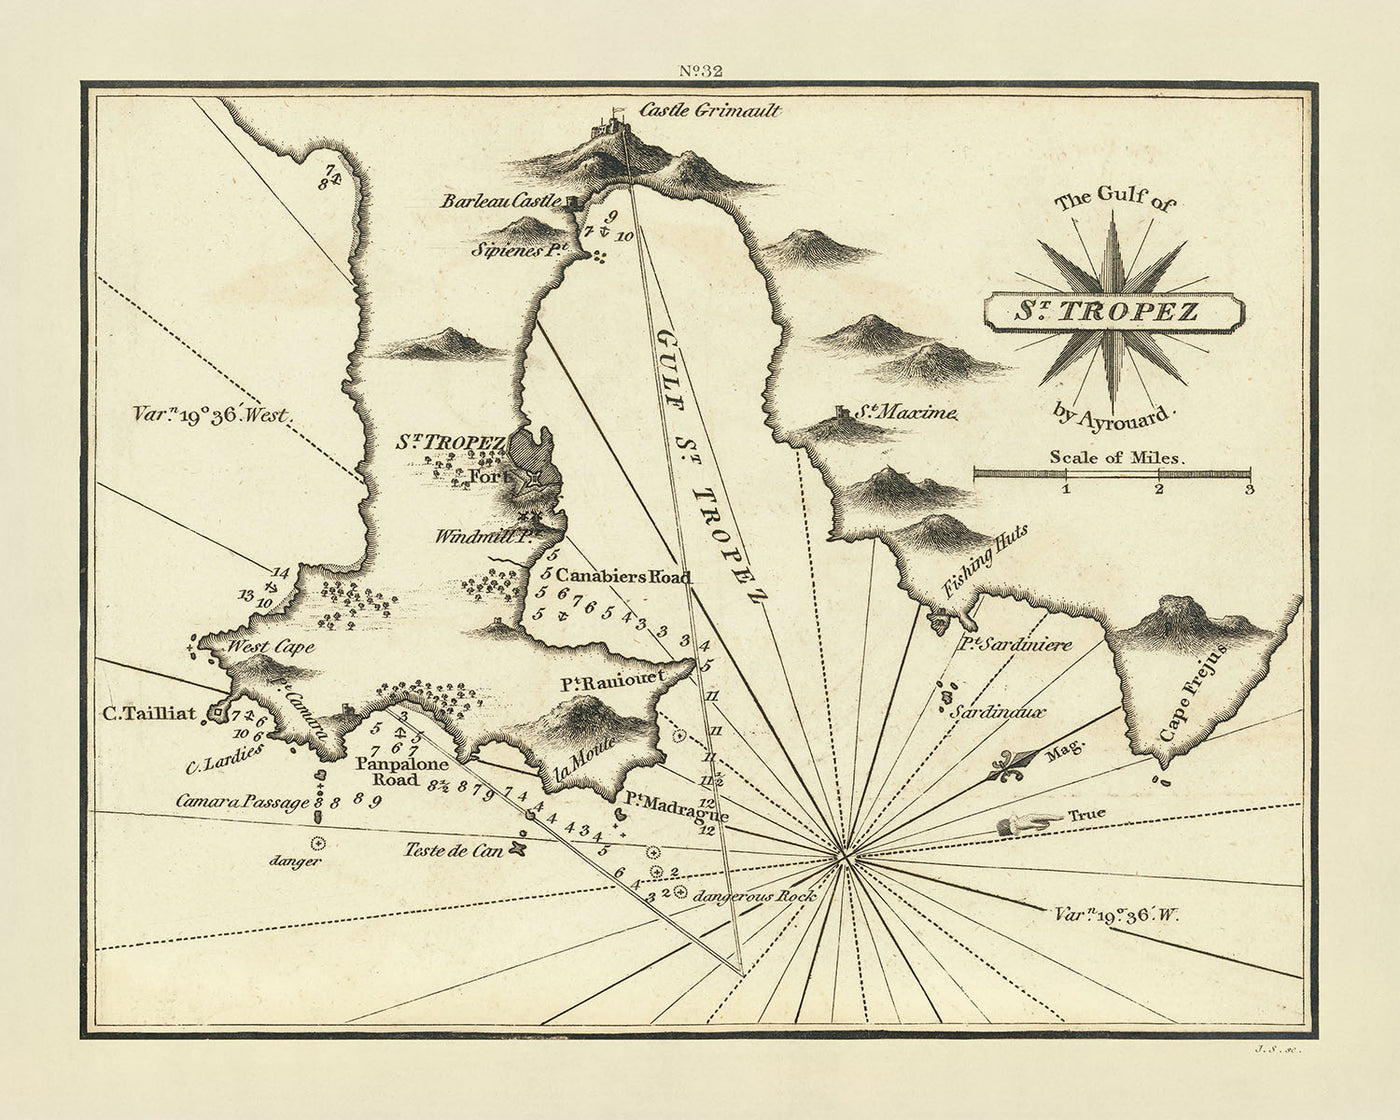 Old Gulf of St. Tropez Nautical Chart by Heather, 1802: Fishing Huts, Forts, Navigational Aids